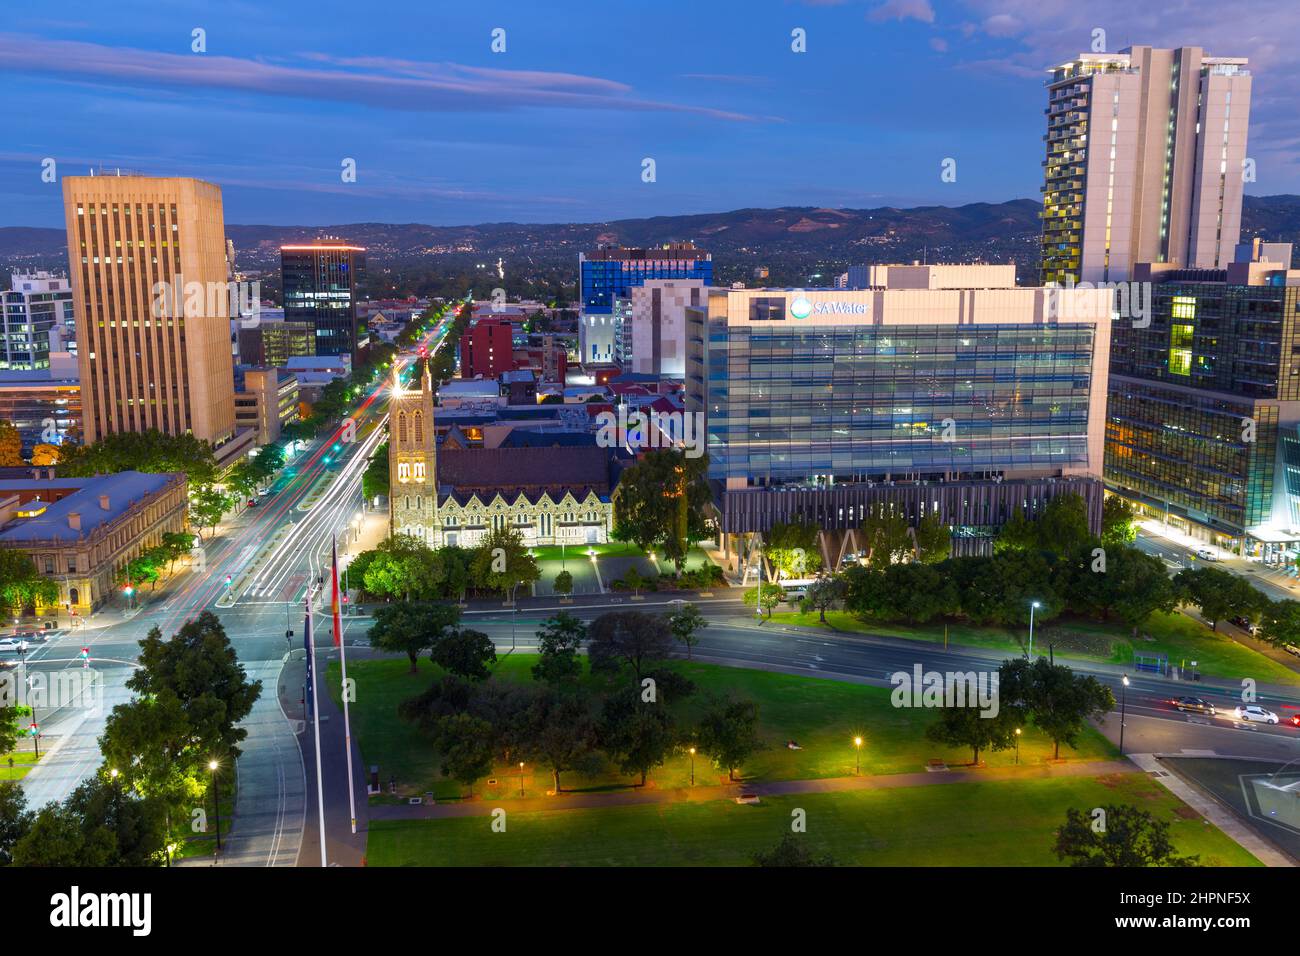 Adelaide, South Australia, seen by night from Victoria Square looking east along Wakefield Street, with the Mount Lofty Ranges in the background. Stock Photo